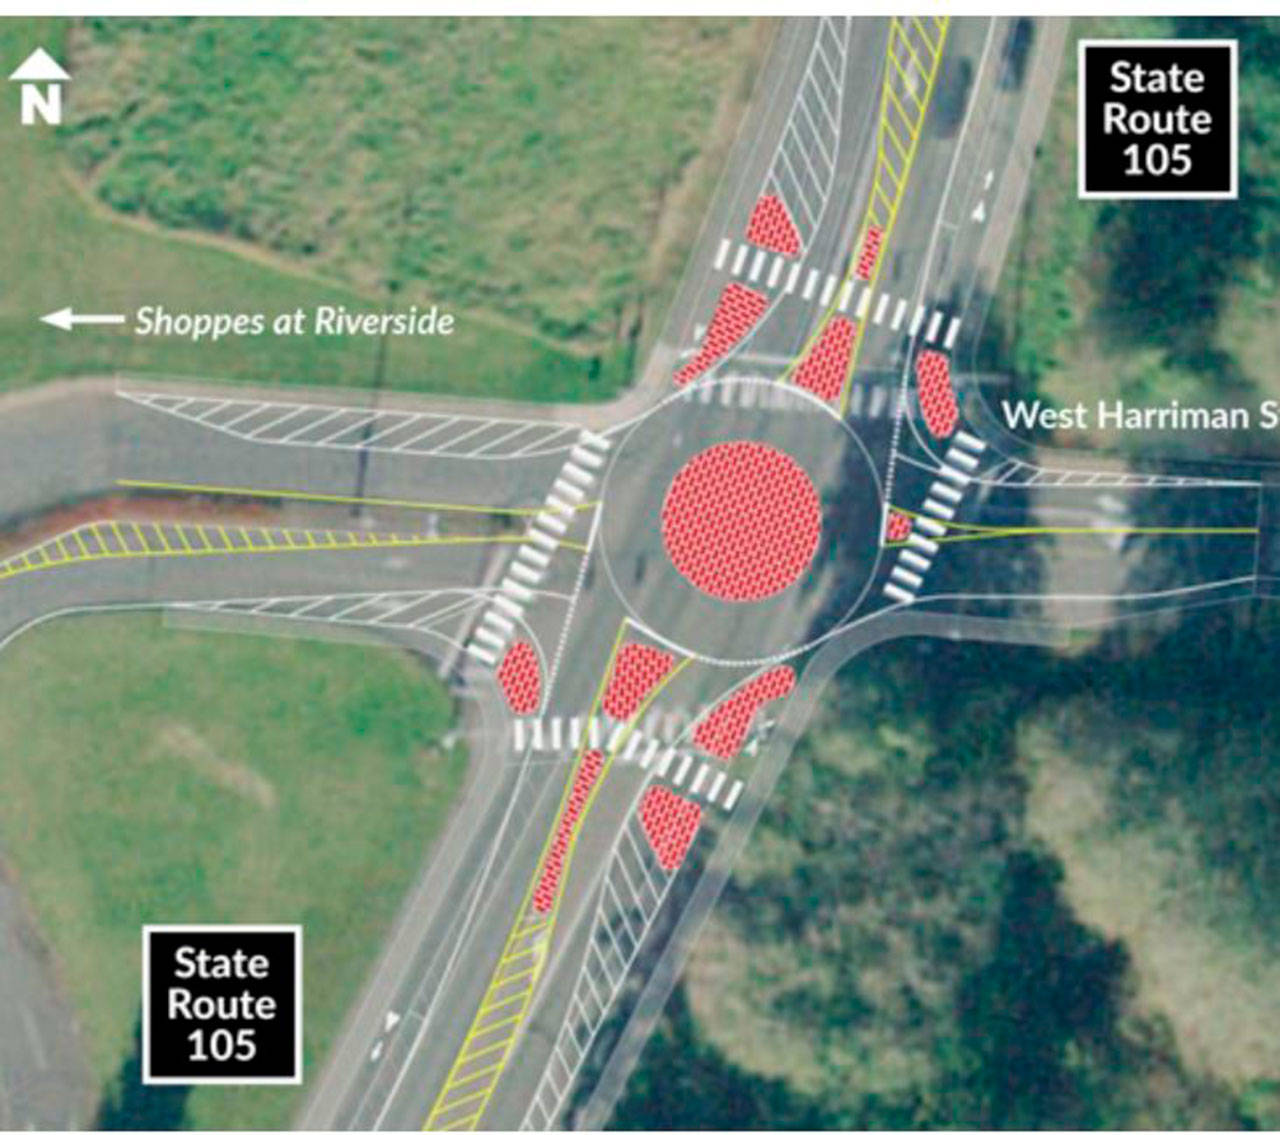 COURTESY STATE DEPARTMENT OF TRANSPORTATION
The state is proposing removing the traffic light at Boone Street and West Harriman and installing a roundabout.